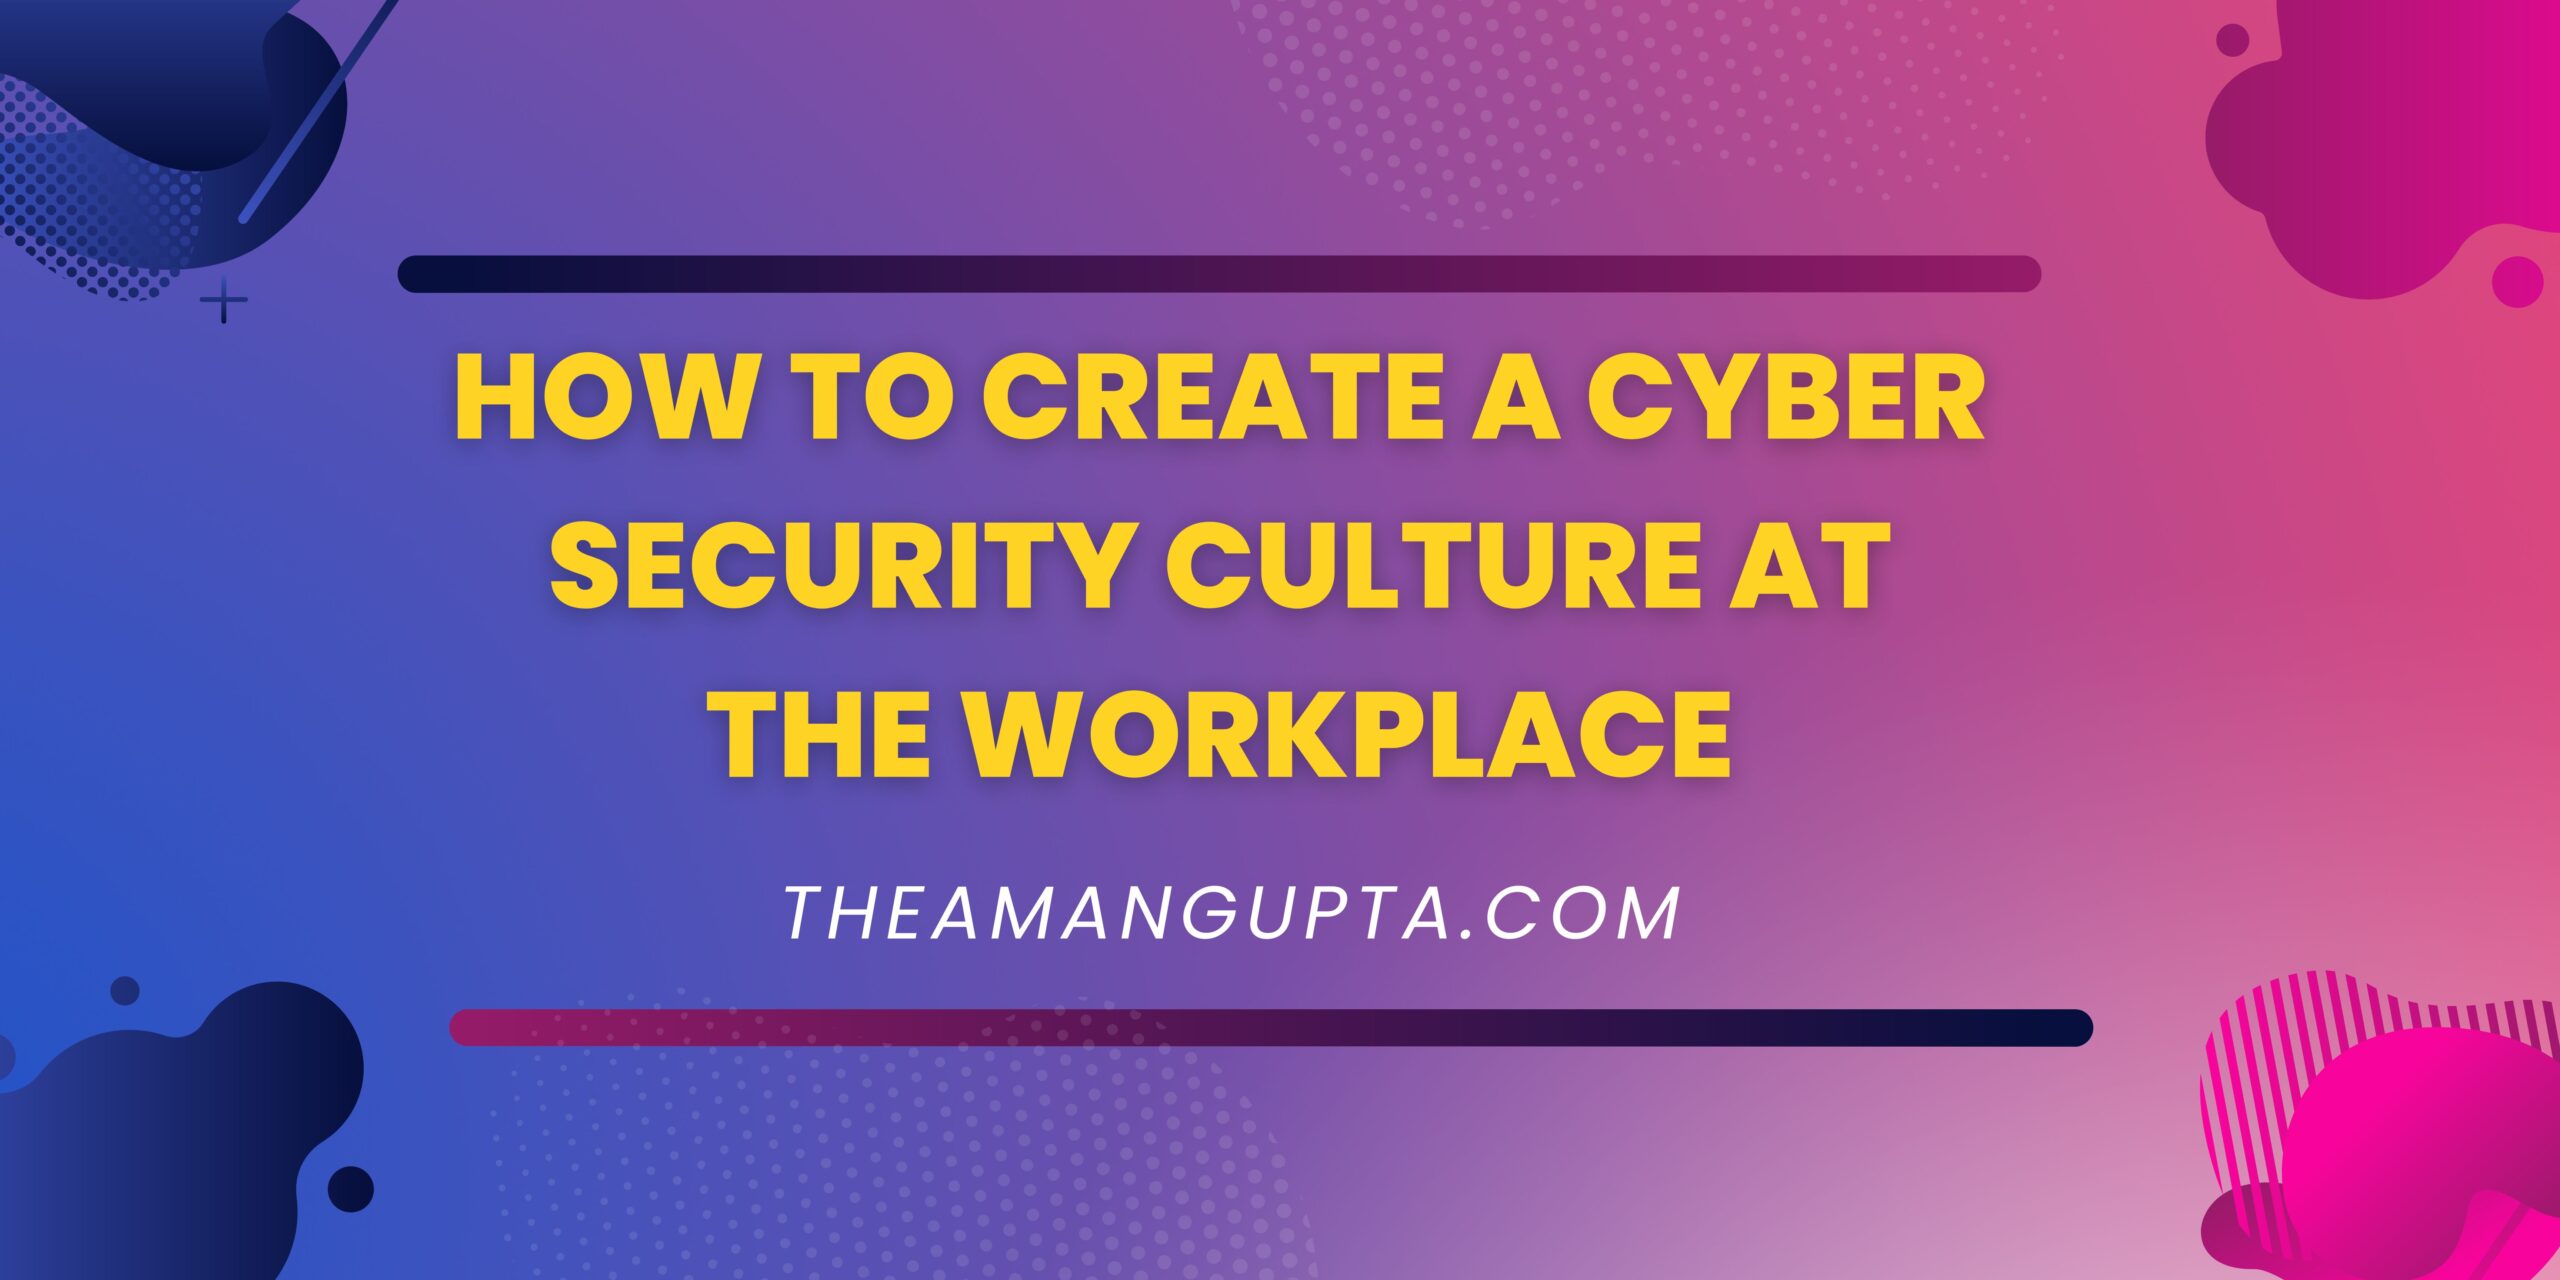 How To Create A Cyber Security Culture At The Workplace|Culture At Workplace|Theamangupta|Theamangupta